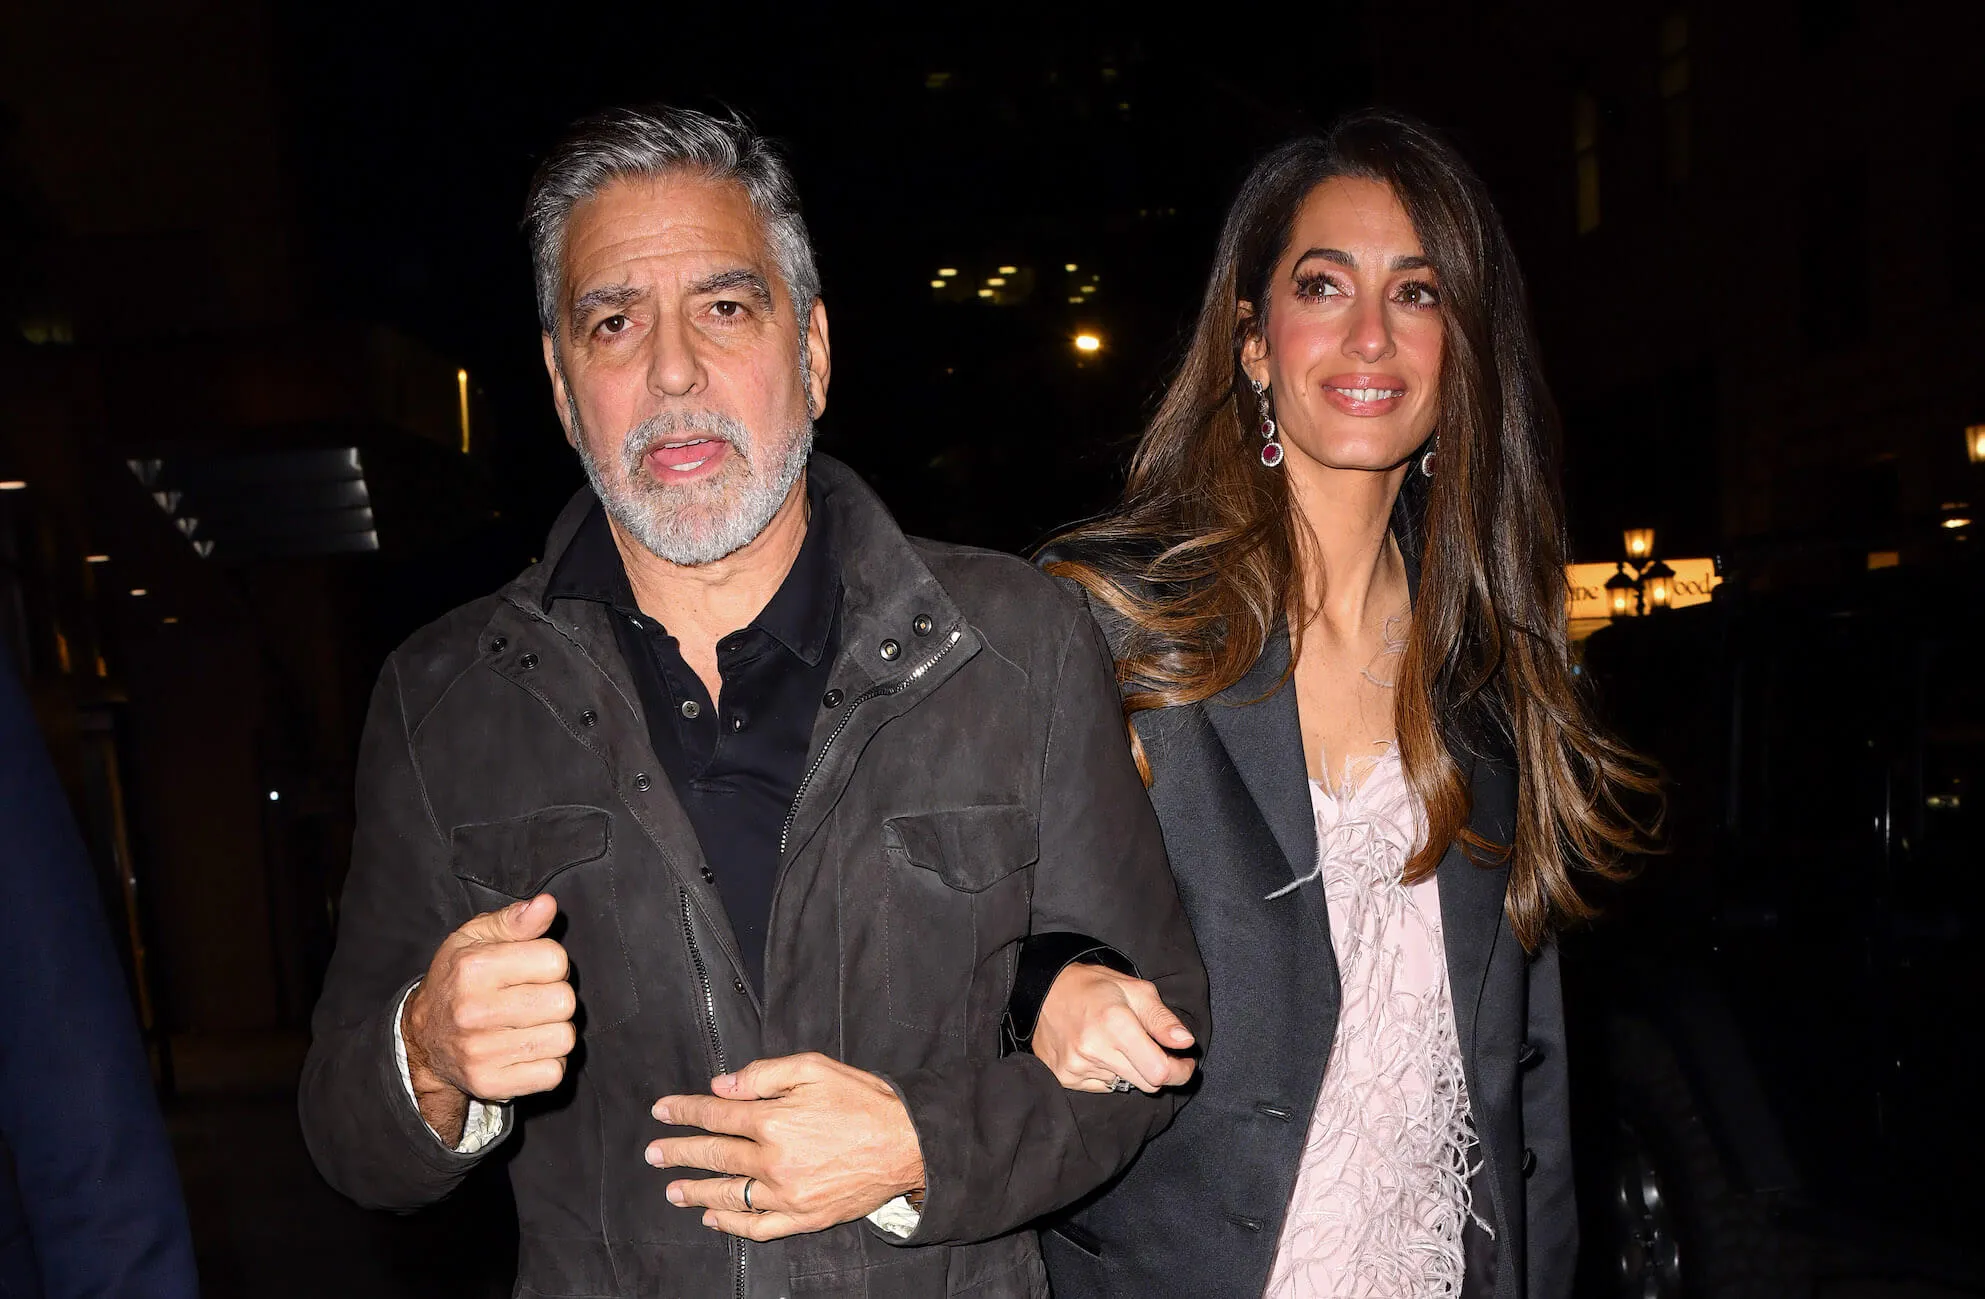 George and Amal Clooney walking outside at night arm in arm in 2023